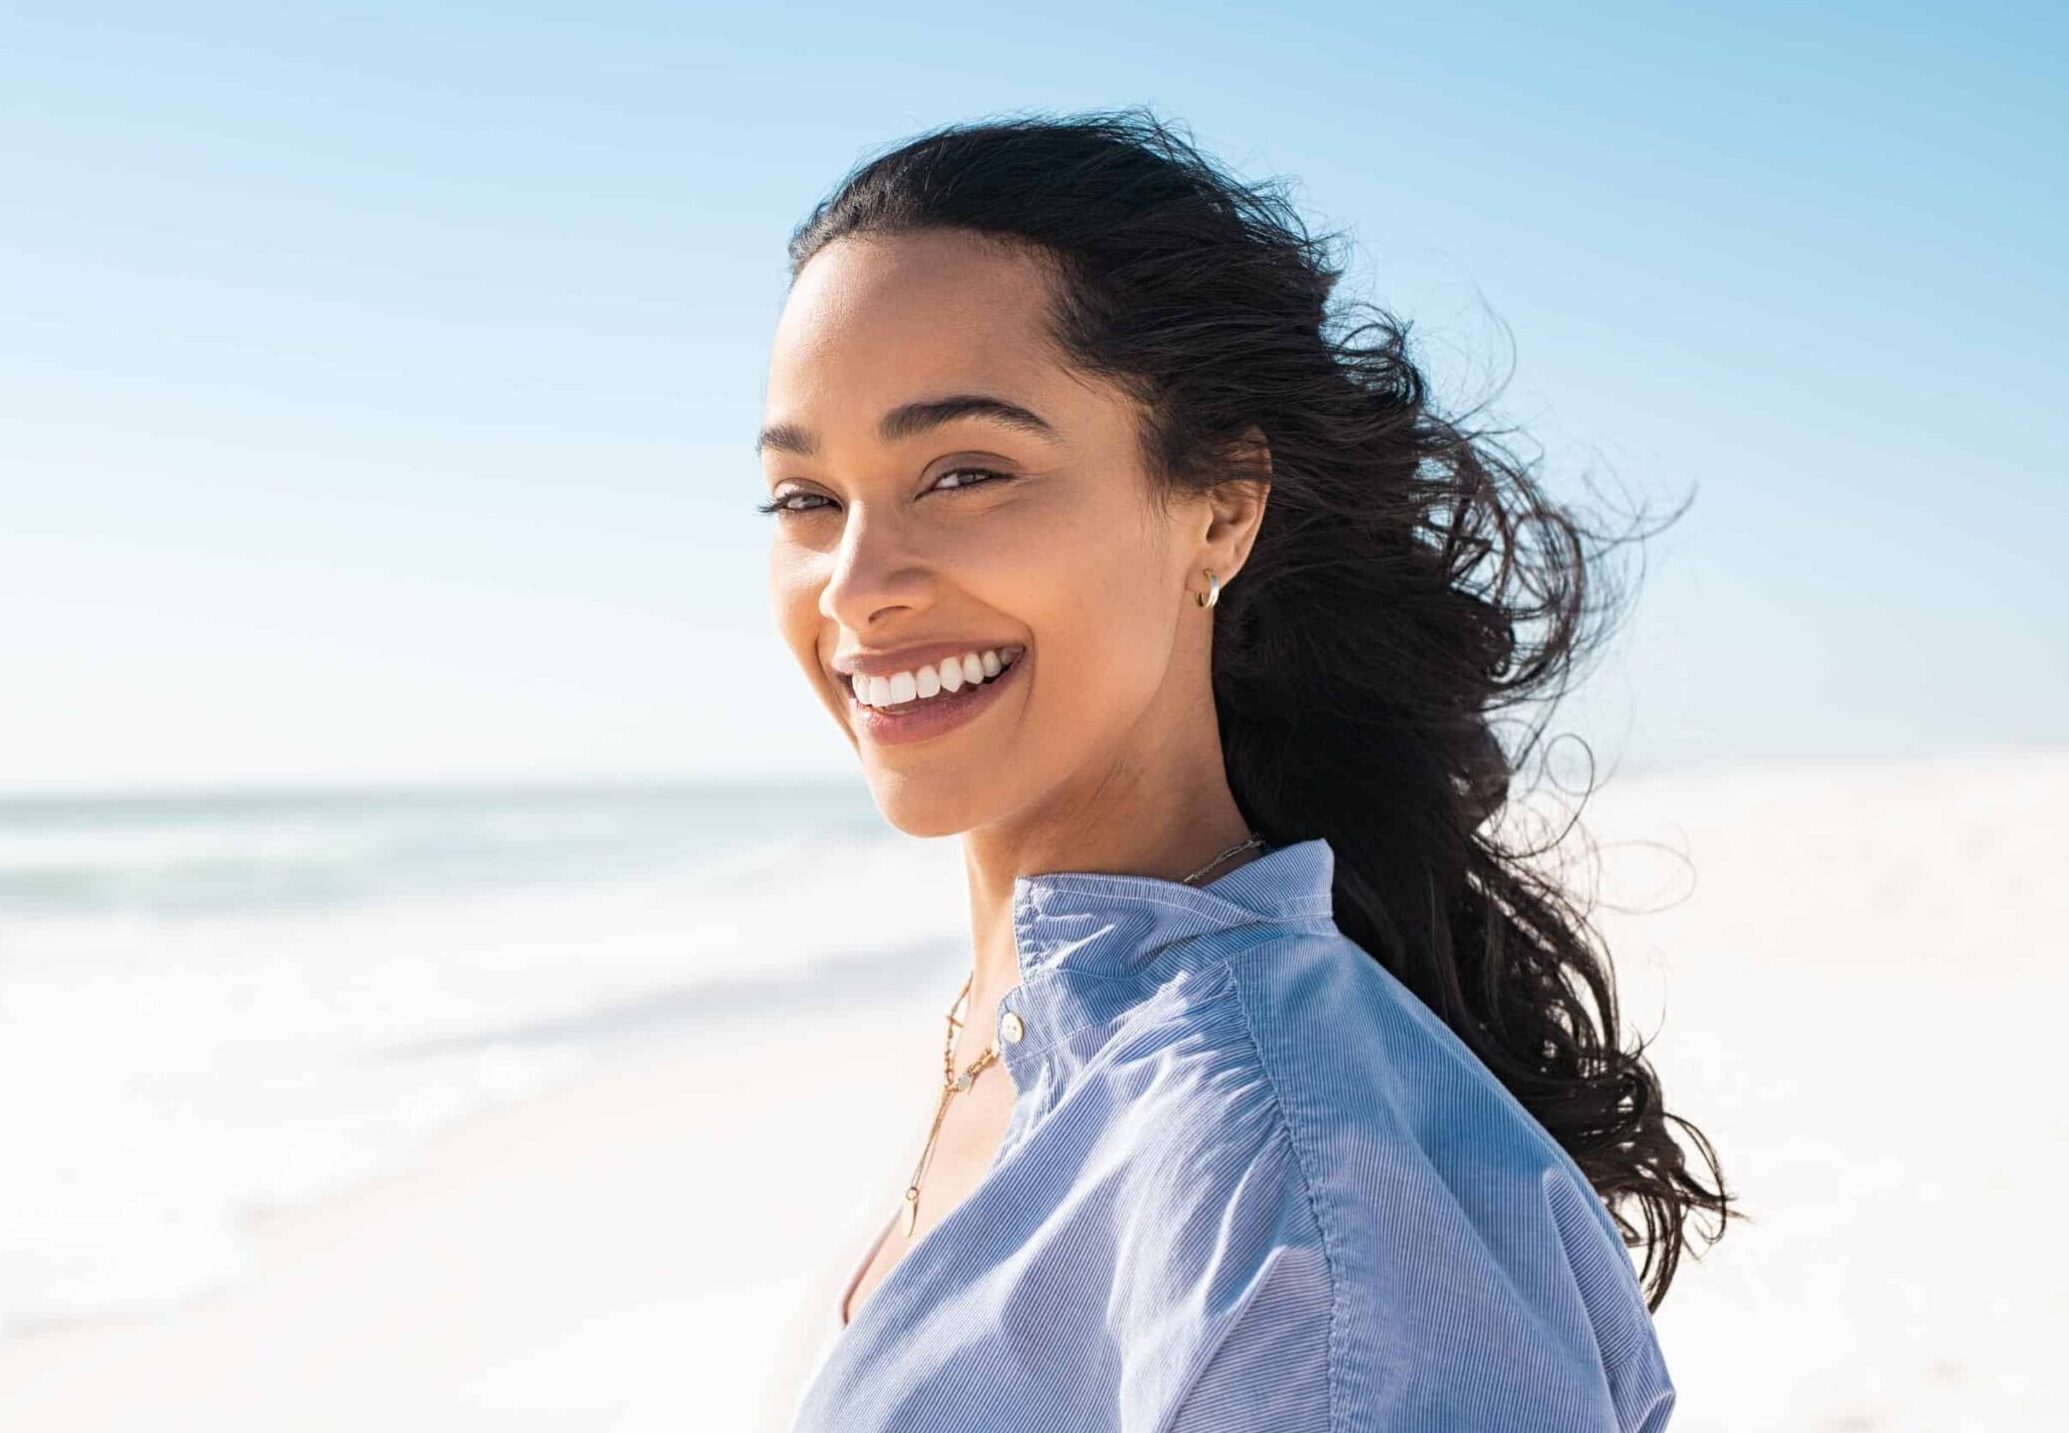 beautiful woman on beach smiling with perfect teeth